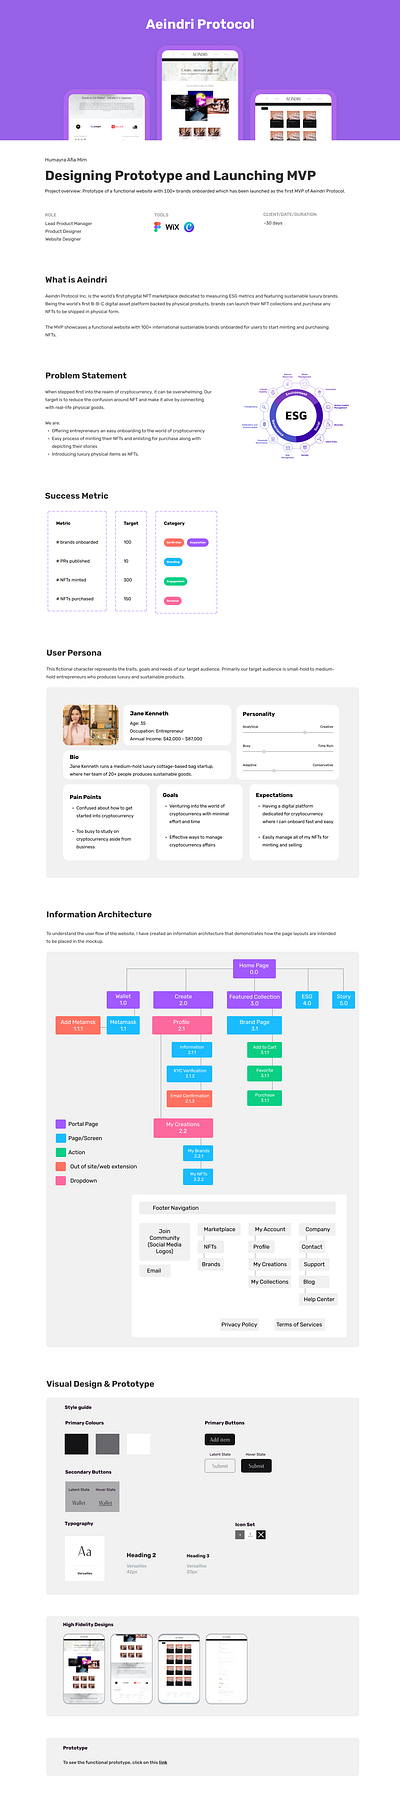 Designing a Prototype and Launching MVP for phygital NFT startup case study mvp prototype ui